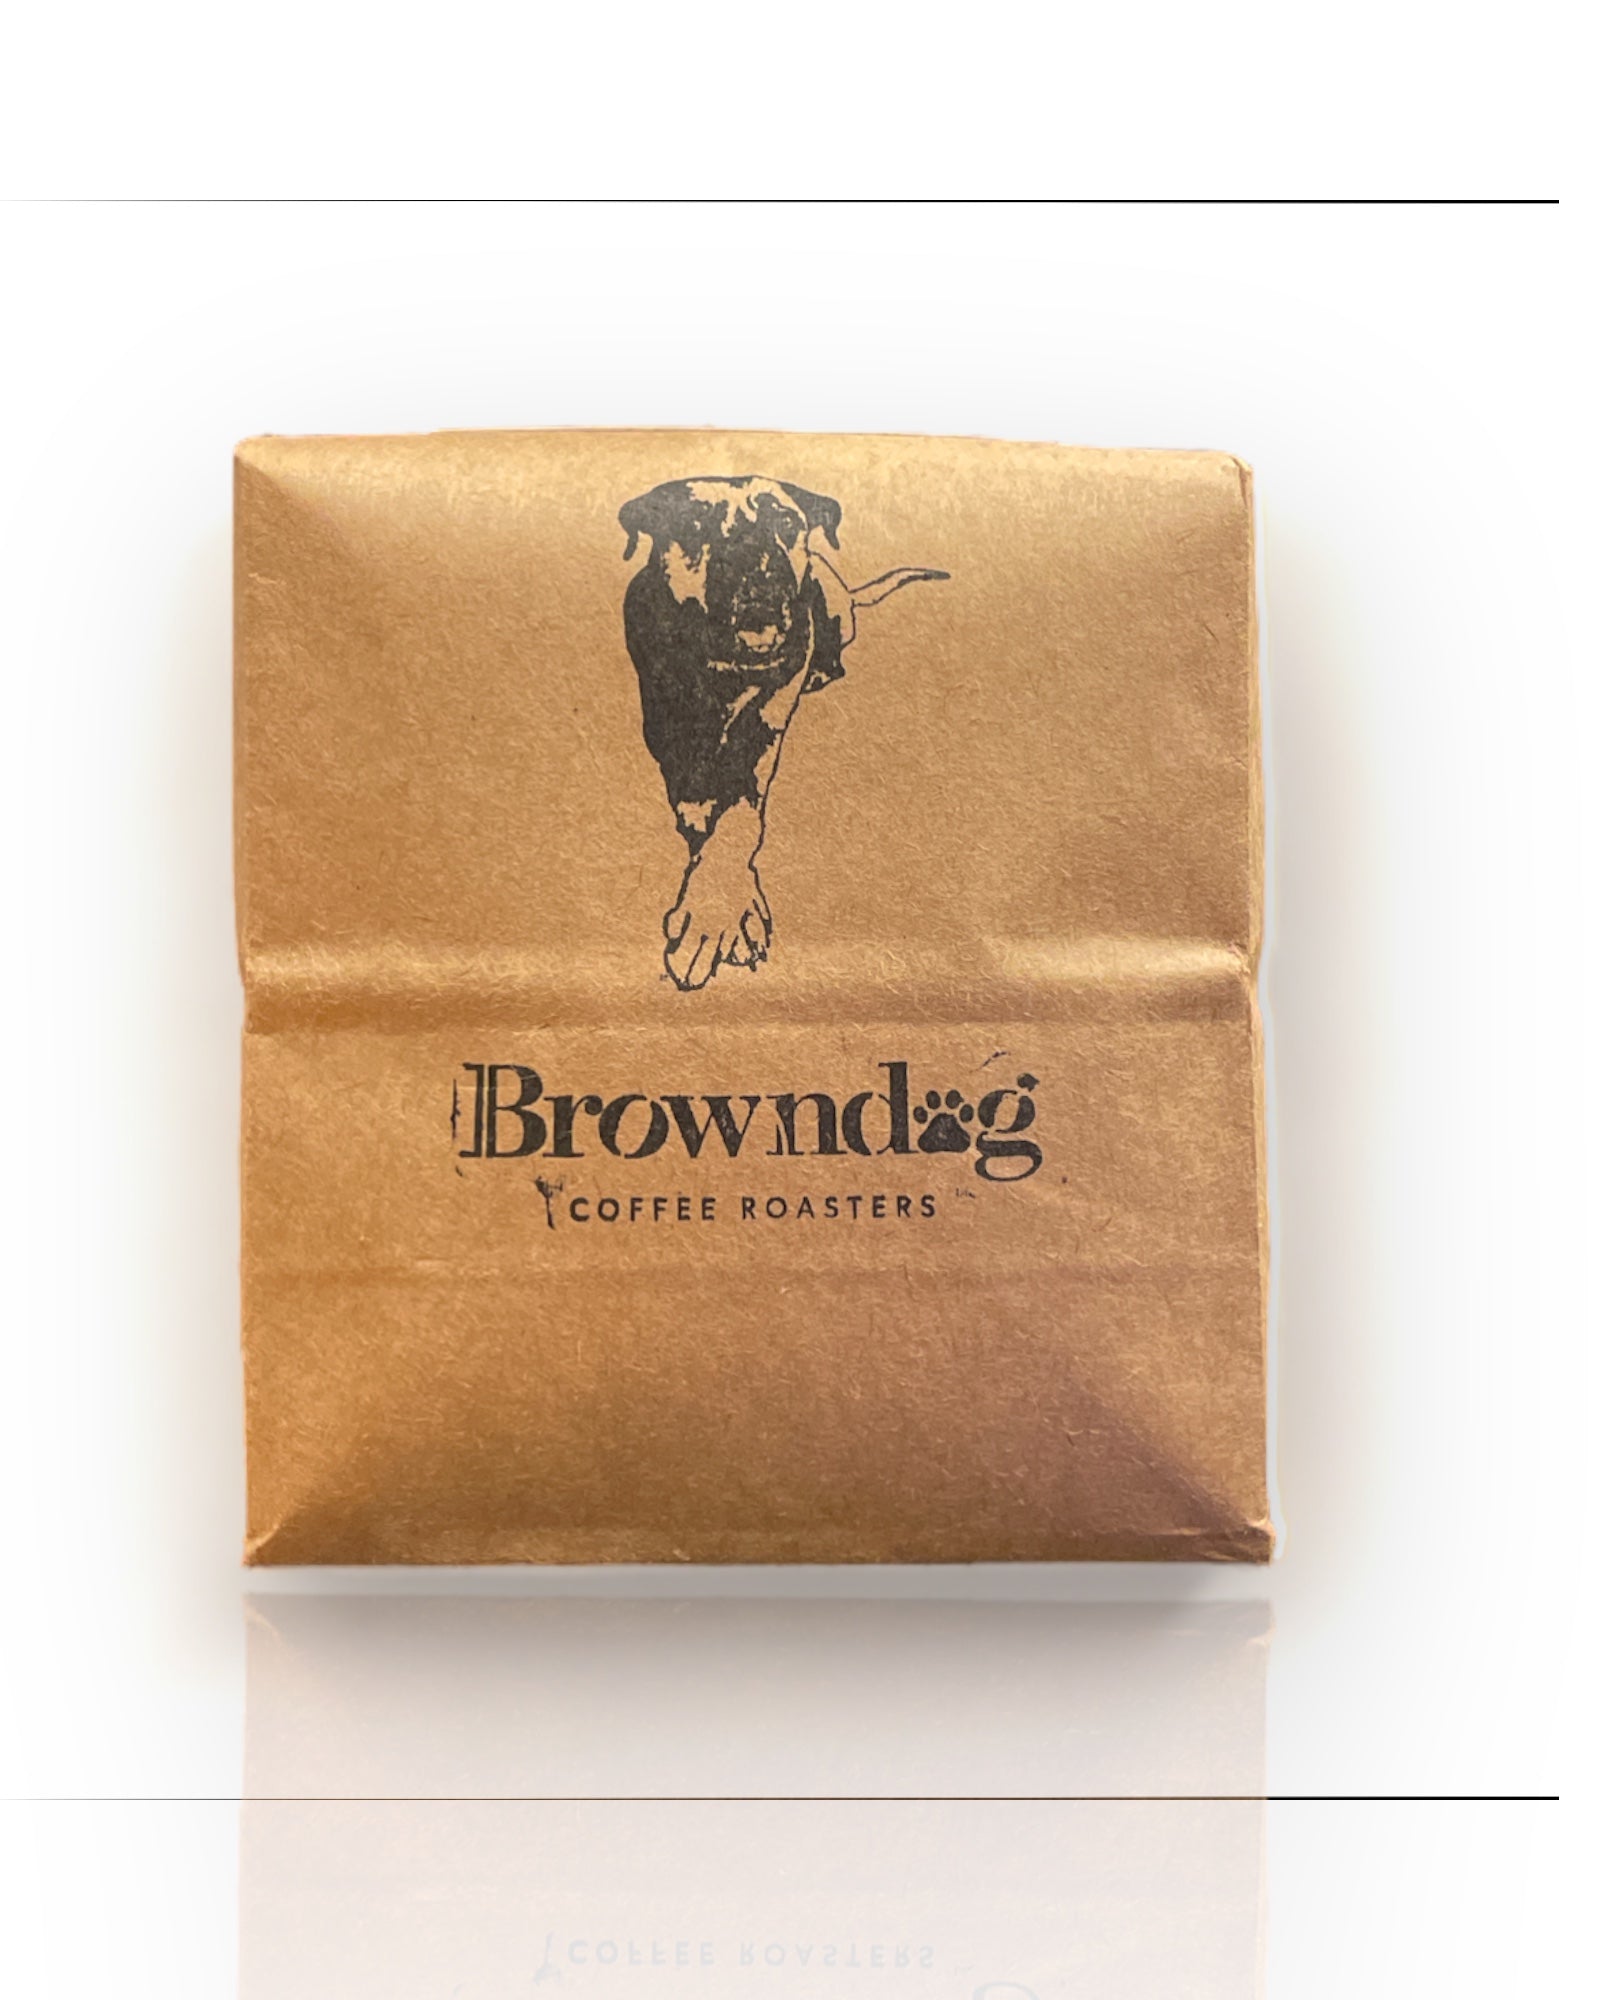 Decaf roasted coffee in a compostable - paper Bag